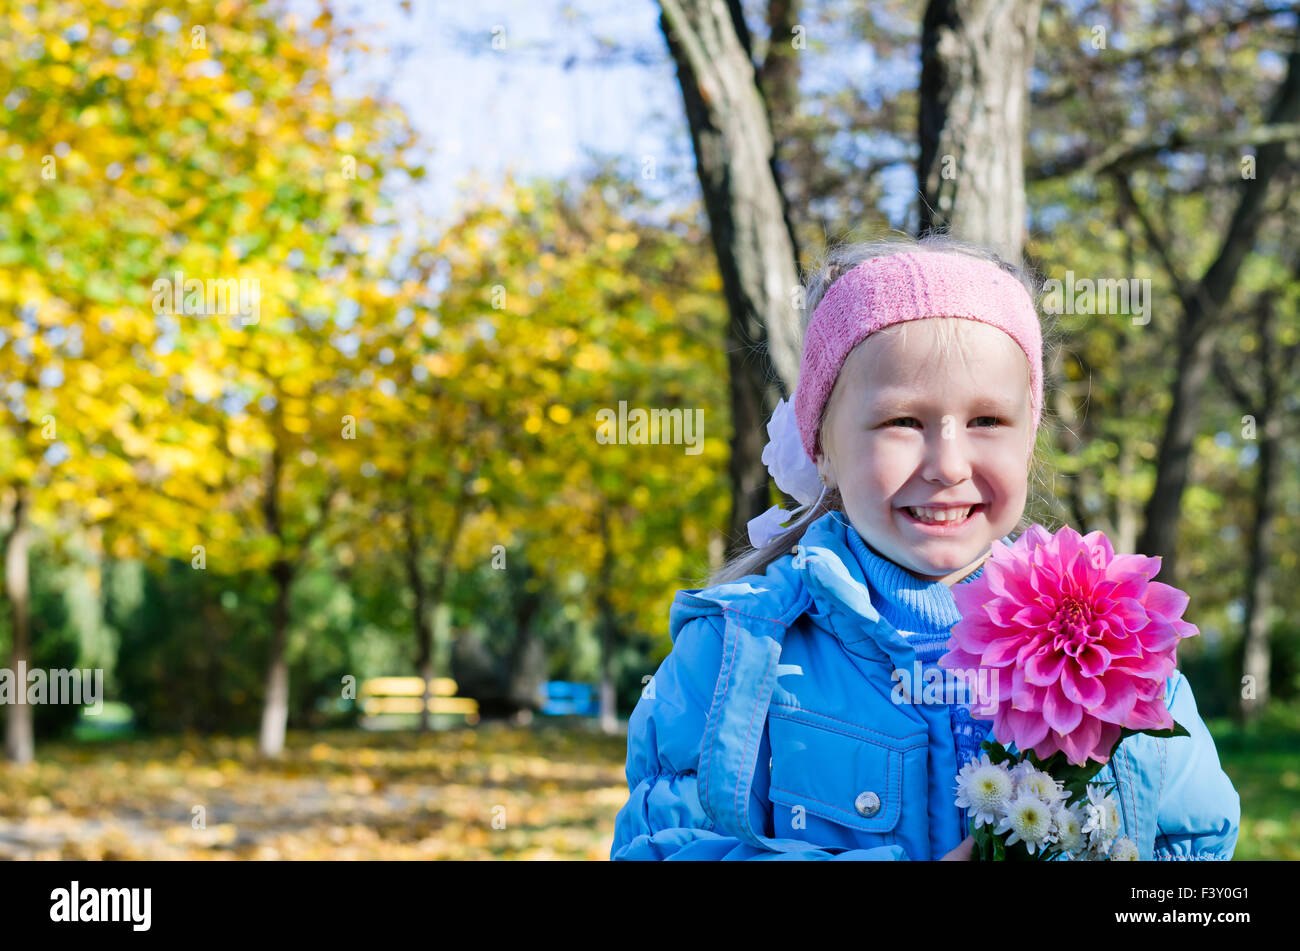 Happy young girl posing with a dahlia Stock Photo